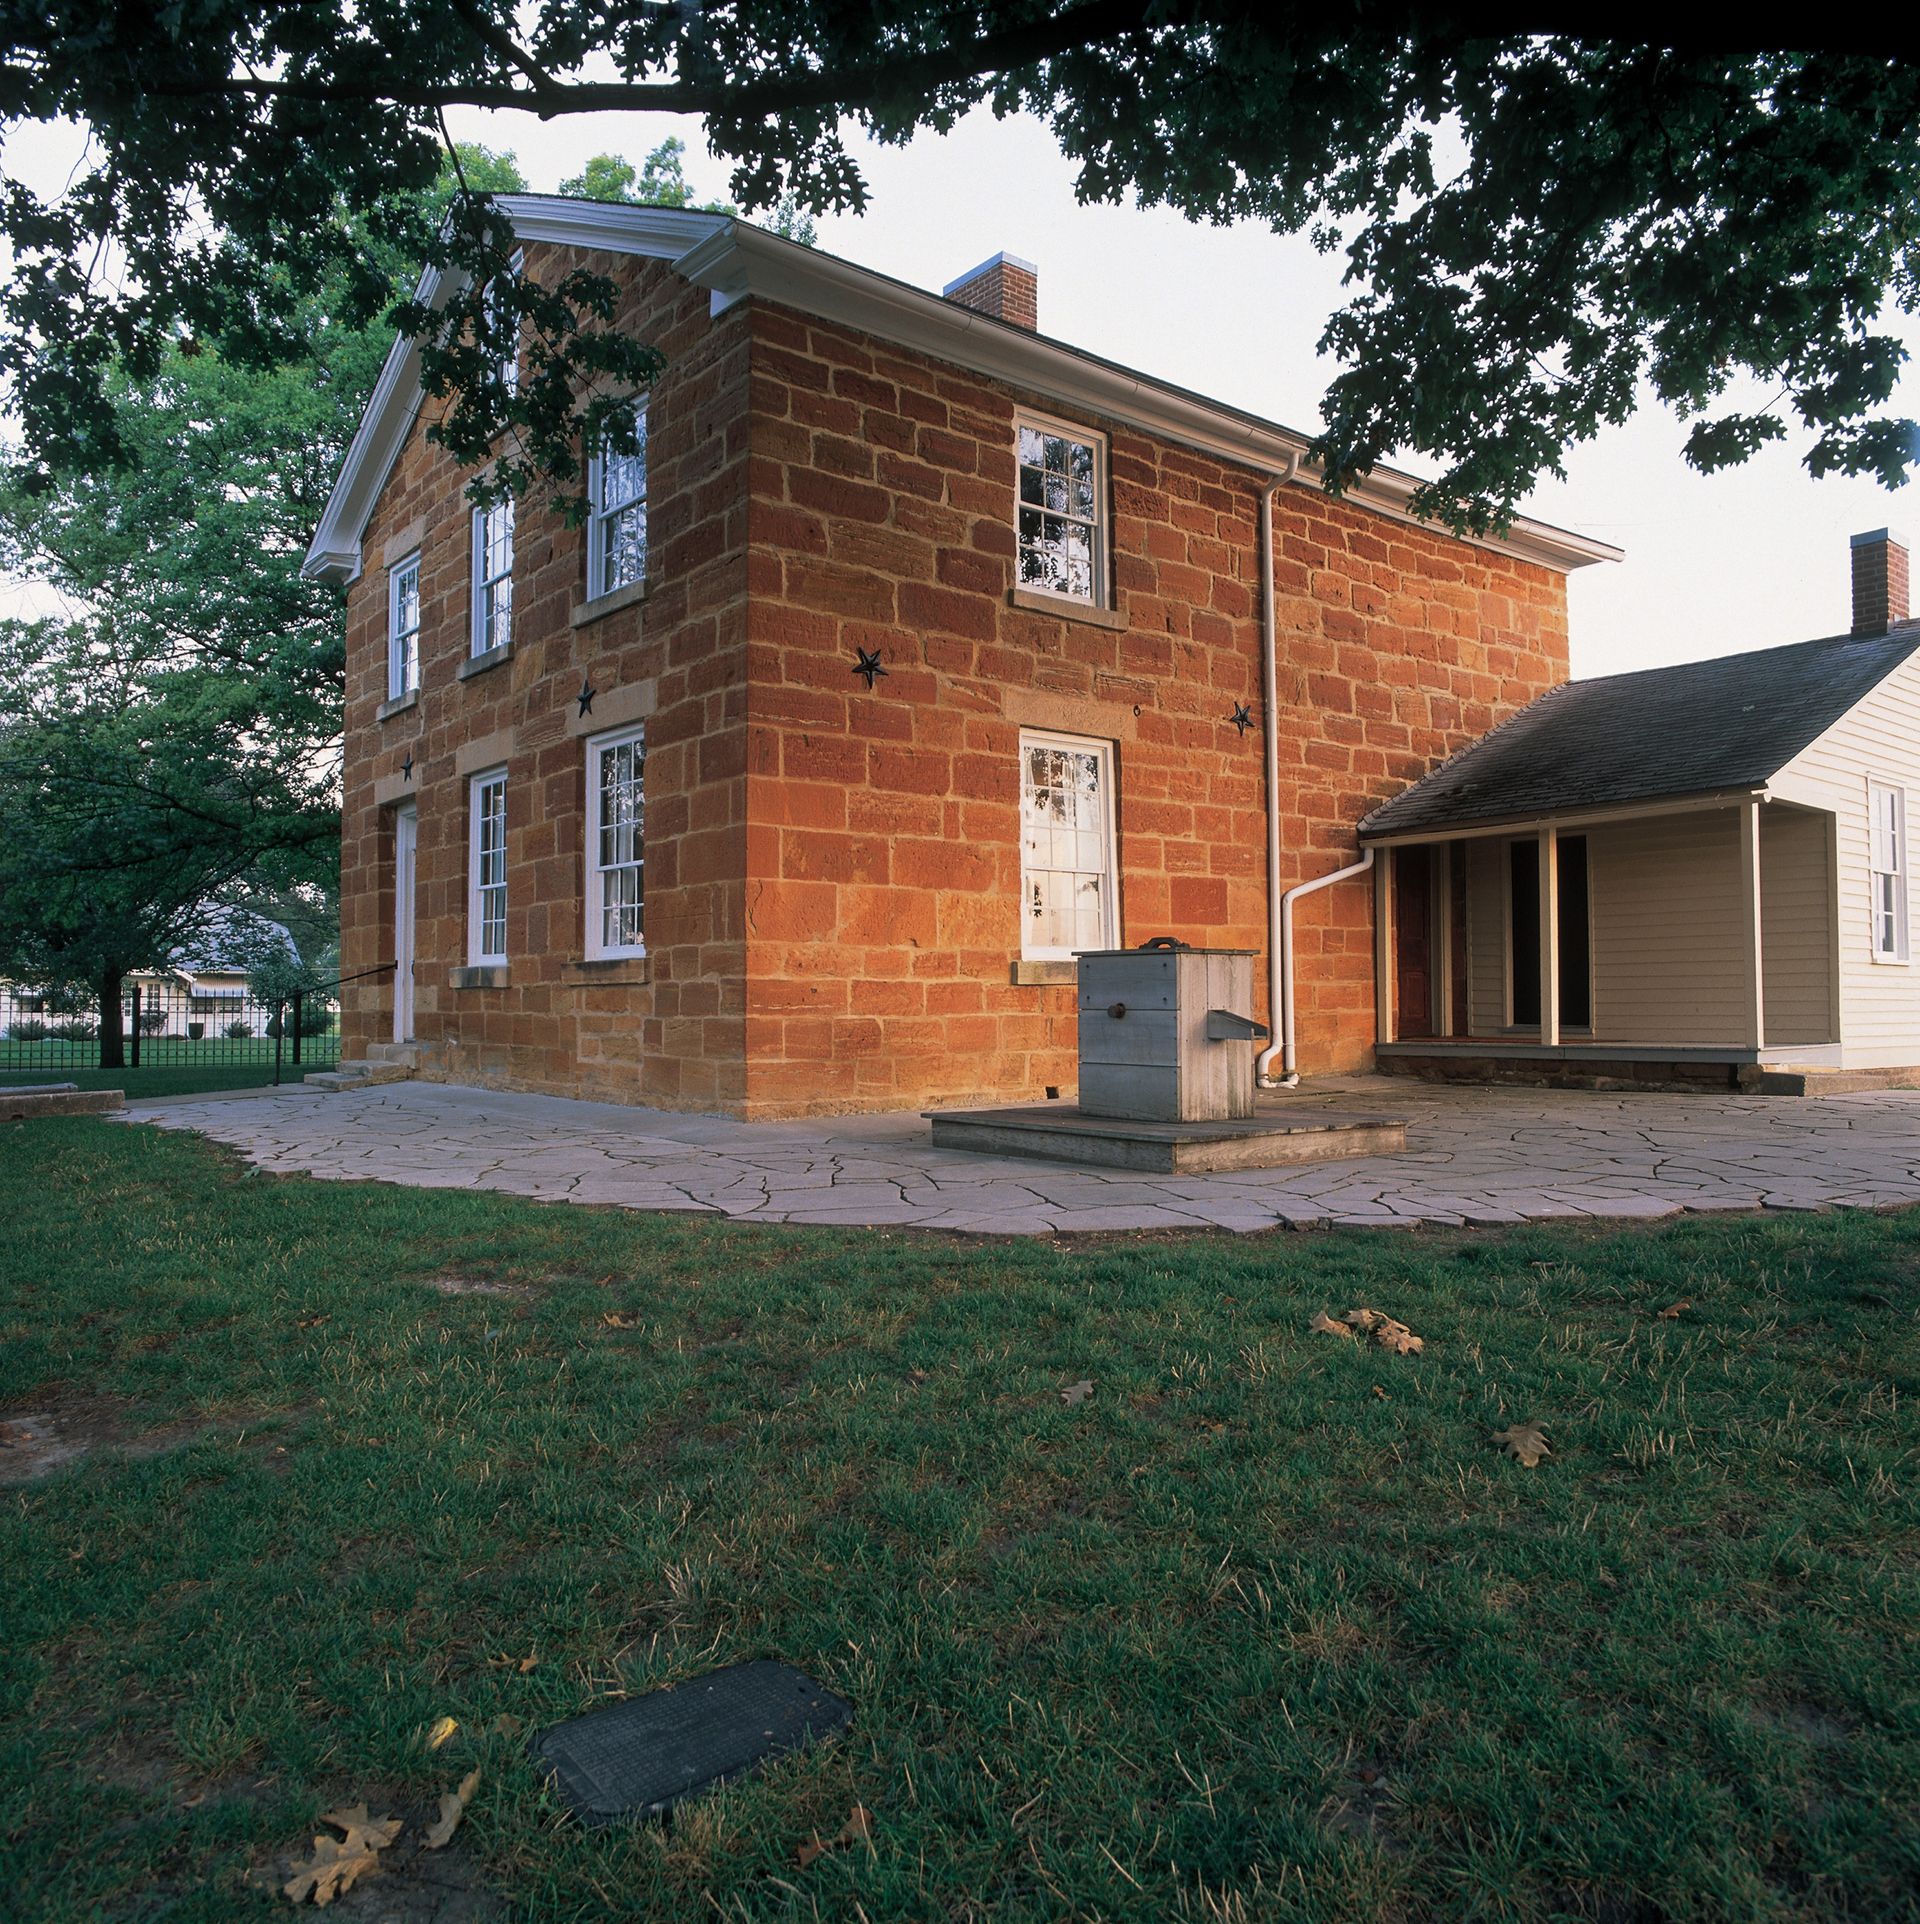 A view of Carthage Jail in Carthage, Illinois.